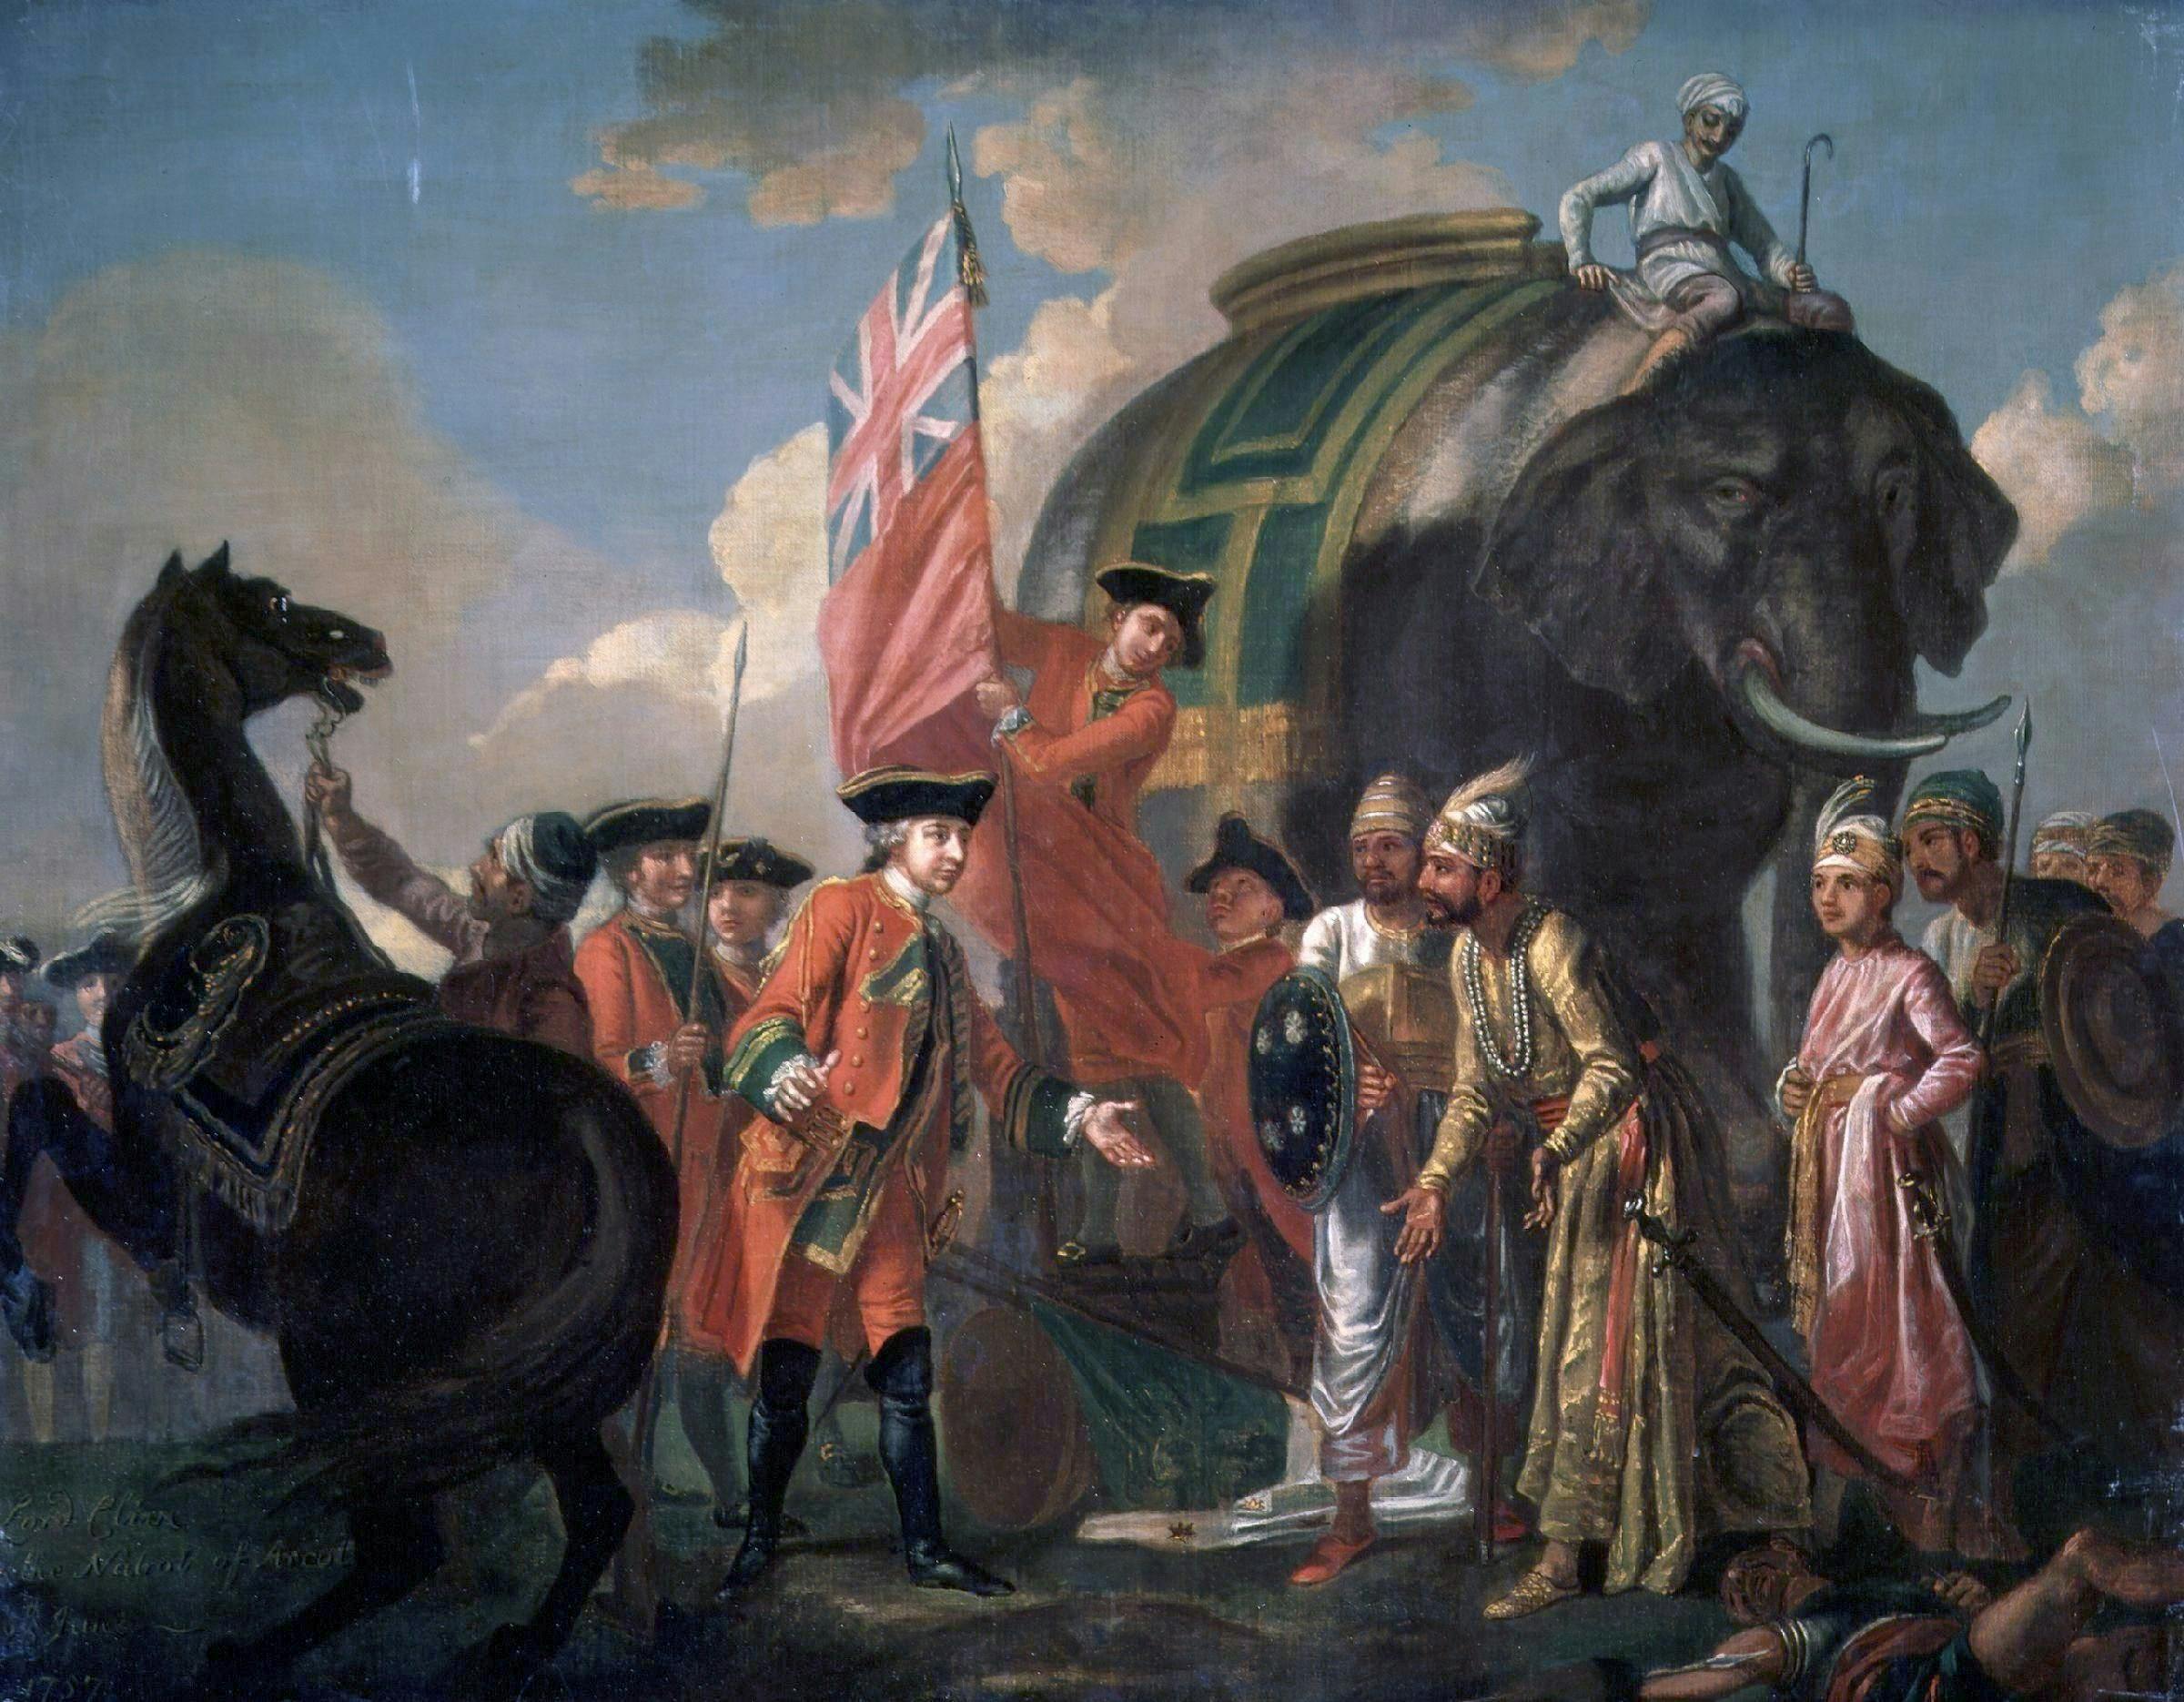 Clive meeting Mir Jafar after the Battle of Plassey, oil on canvas (Francis Hayman, c. 1762)